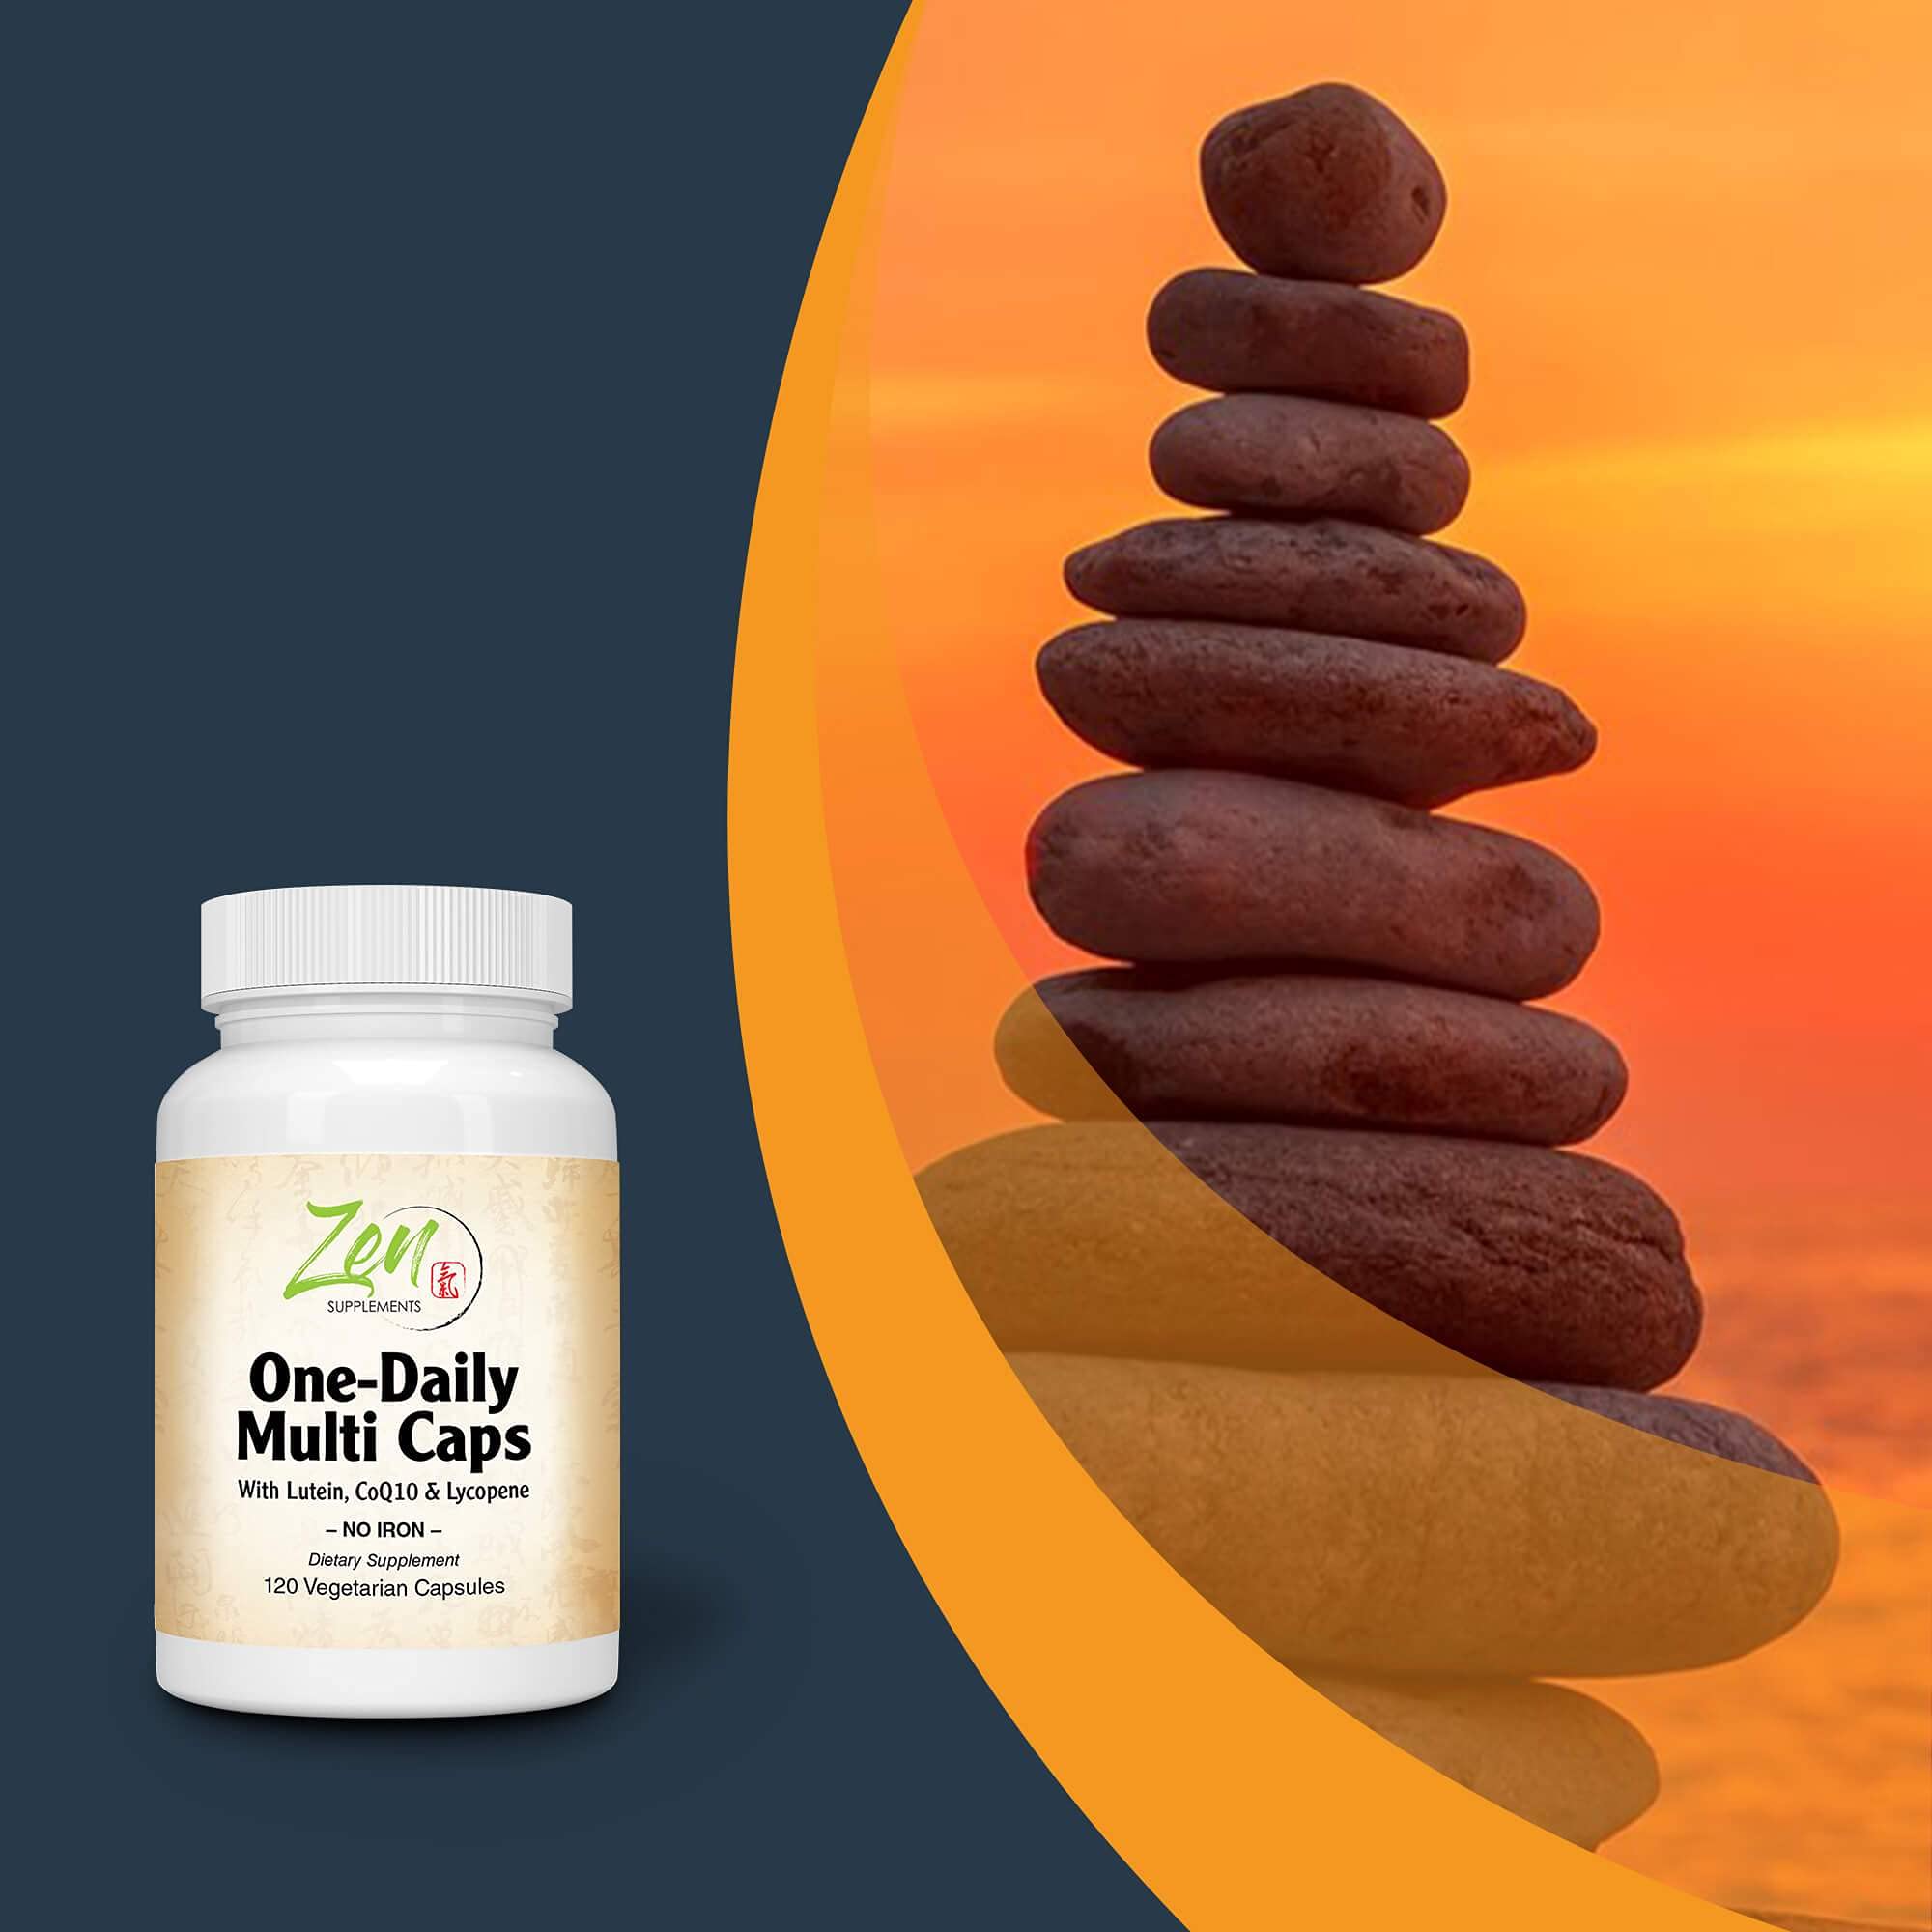 Zen Supplements -One Daily Multi-Vitamin Caps with Lutein, Lycopene and CoQ10 (Iron Free) 120-Vegcaps - Hi-potency multivitamin with Lutein, Lycopene and CoQ10 that Support Macular and Visual Function